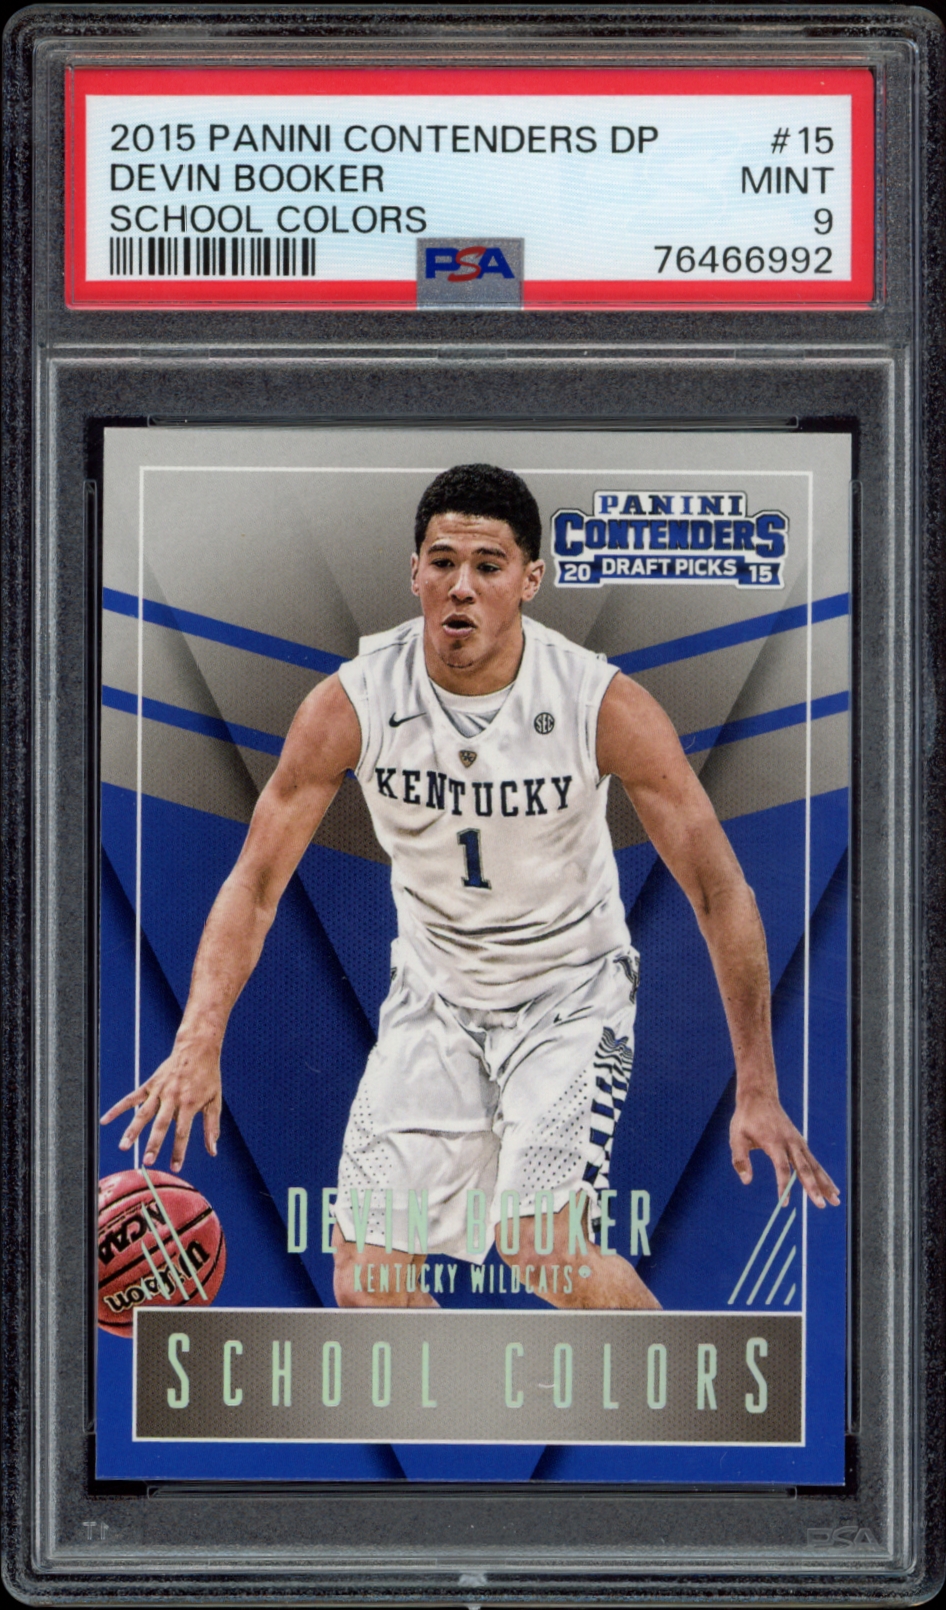 Devin Booker in action on mint condition 2015-16 Panini Contenders Kentucky Wildcats trading card.